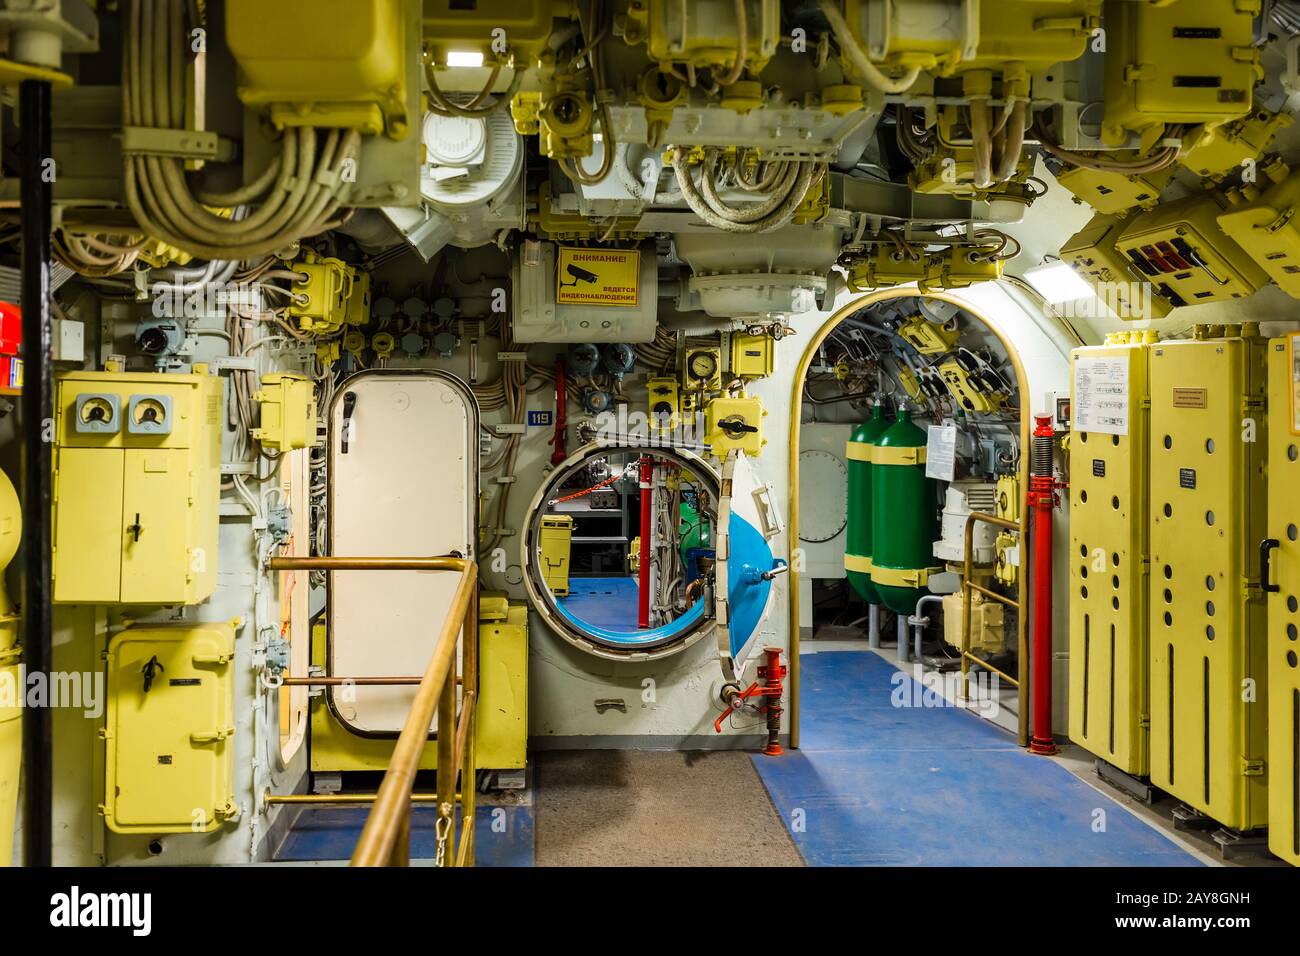 Moscow, Russia - May 04, 2018: Interior of Russian Soviet submarine in museum of naval forces Stock Photo